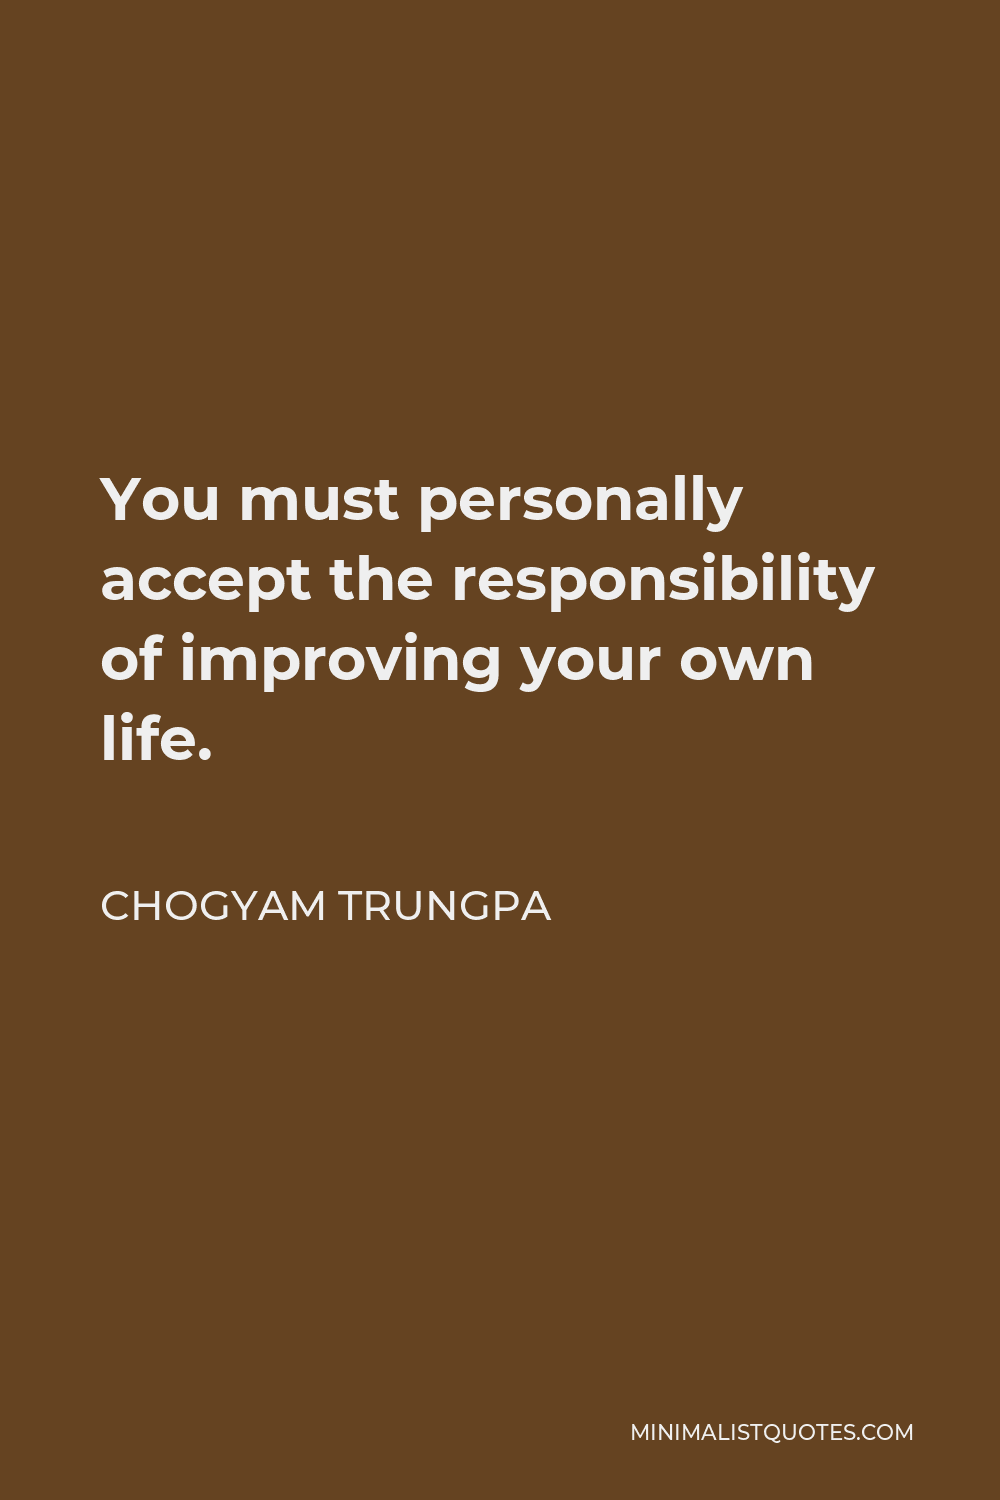 Chogyam Trungpa Quote - You must personally accept the responsibility of improving your own life.